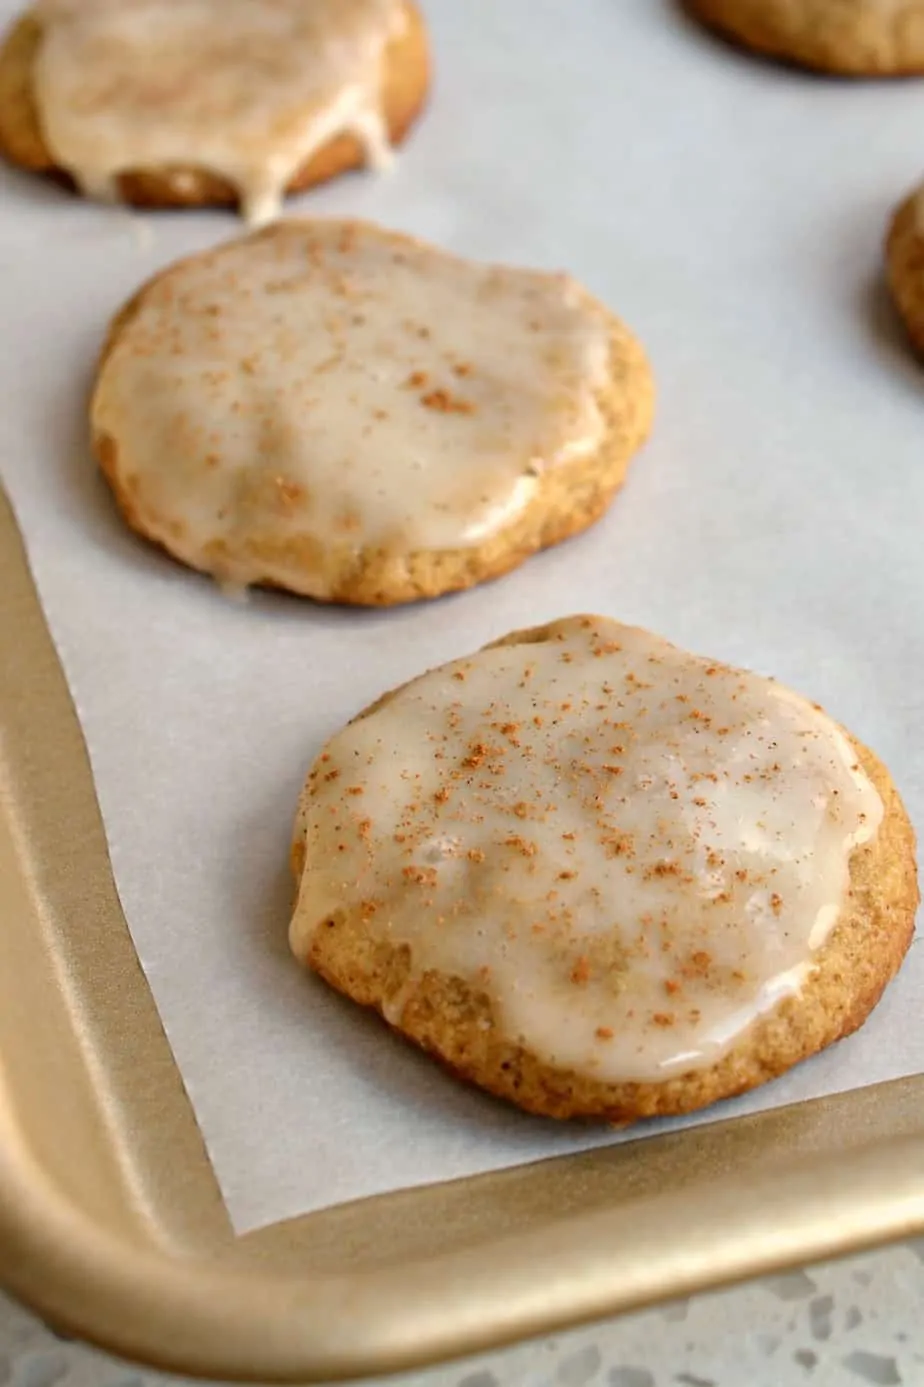 You are going to love these easy Eggnog Cookies with the creamy flavors of eggnog, nutmeg, cinnamon and cloves.